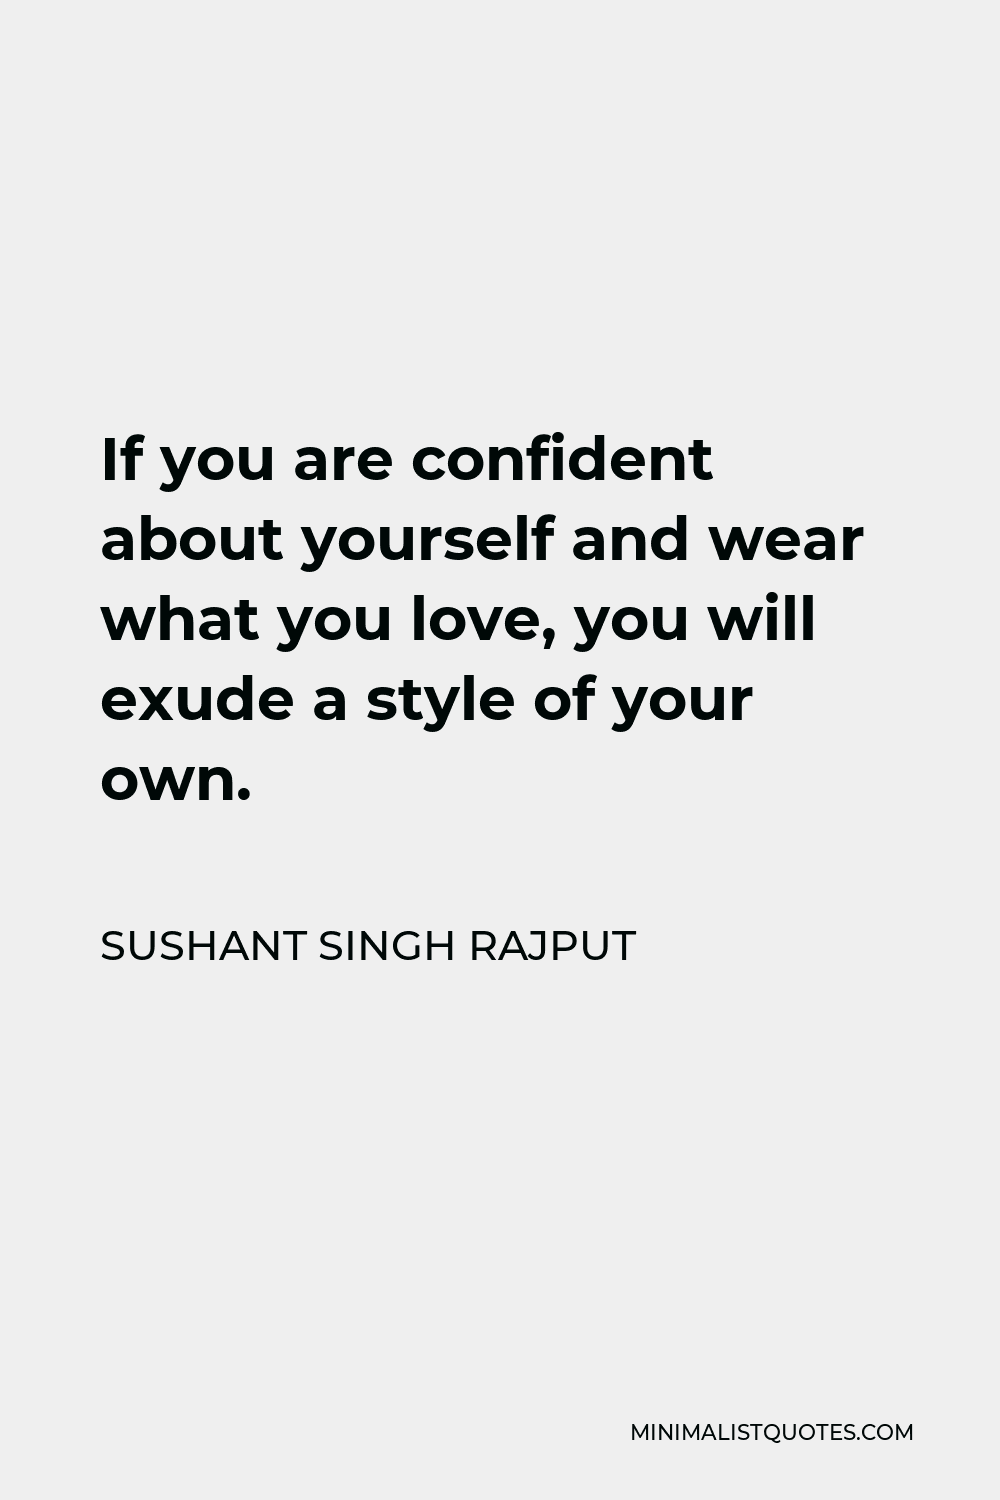 Sushant Singh Rajput Quote - If you are confident about yourself and wear what you love, you will exude a style of your own.